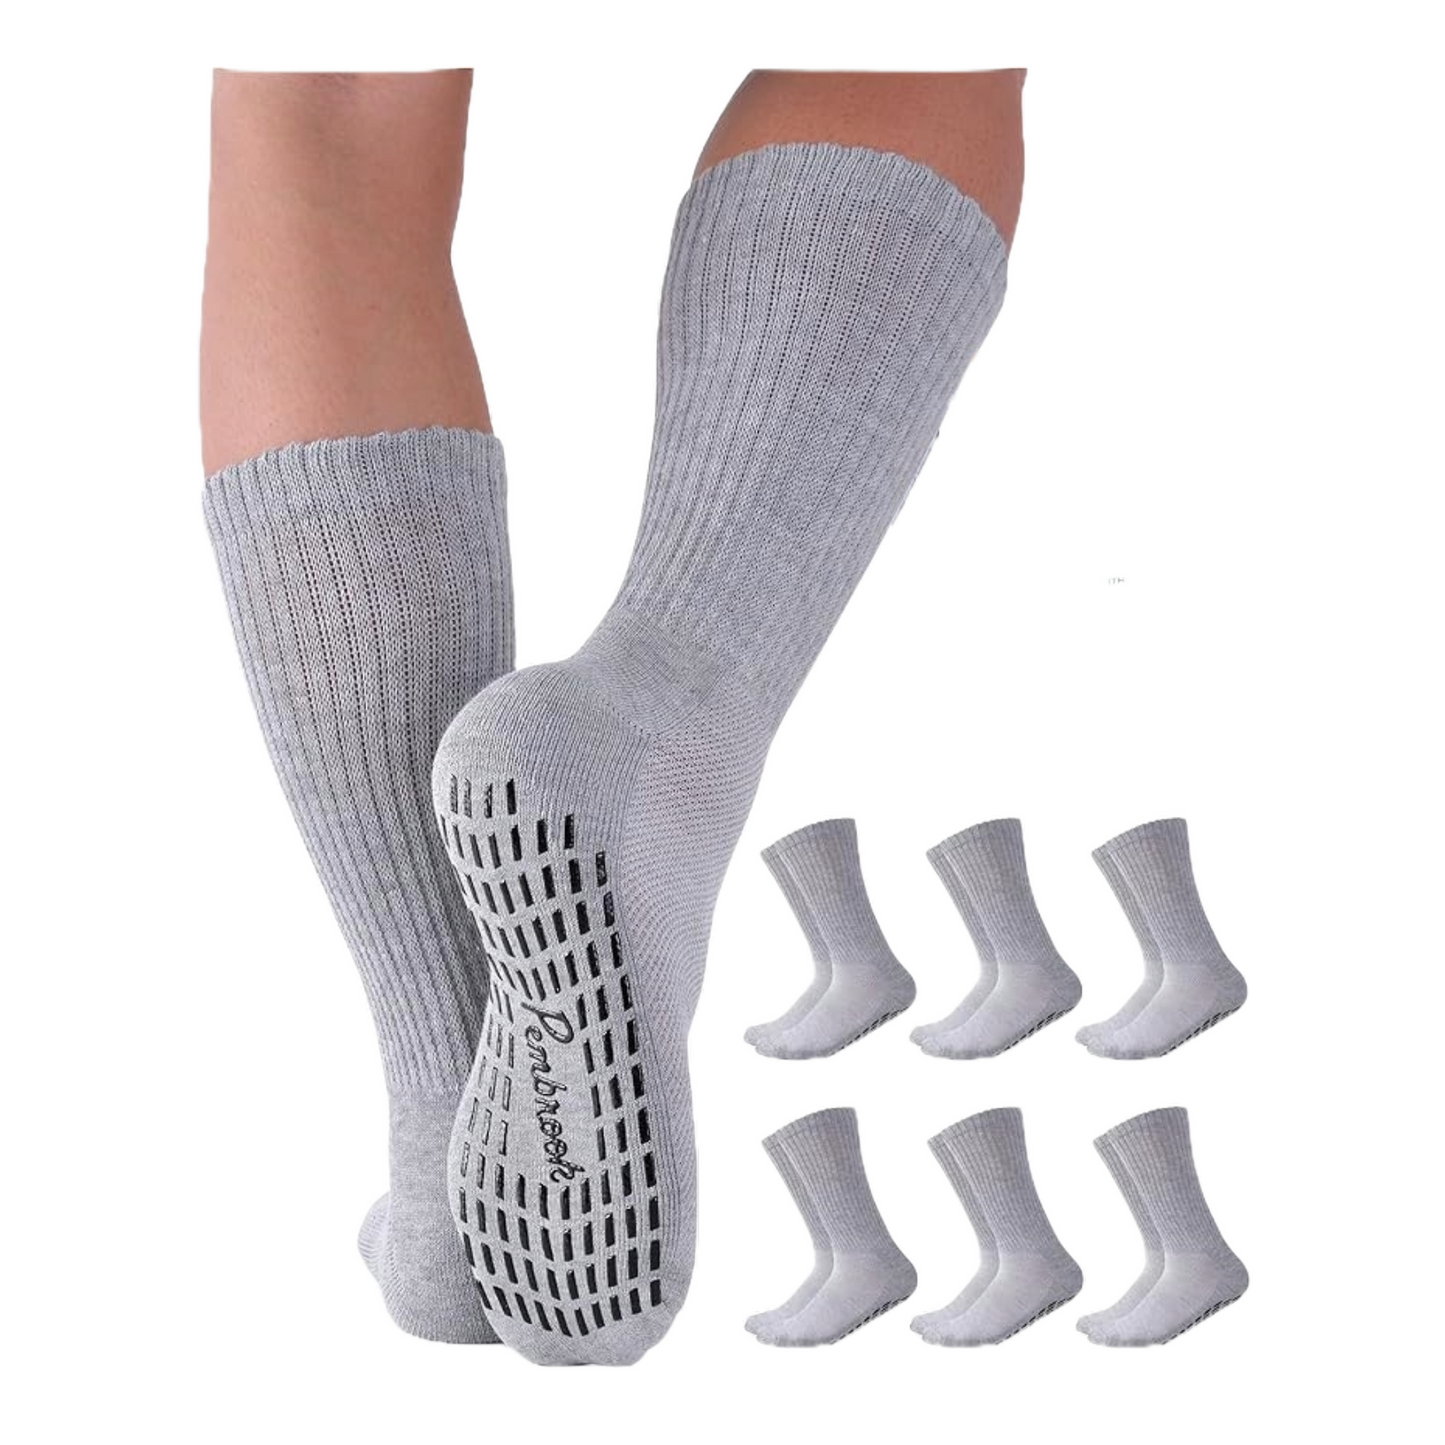 Pembrook Diabetic Socks with Grippers for Men & Women (Color Gray) - 6 Pairs